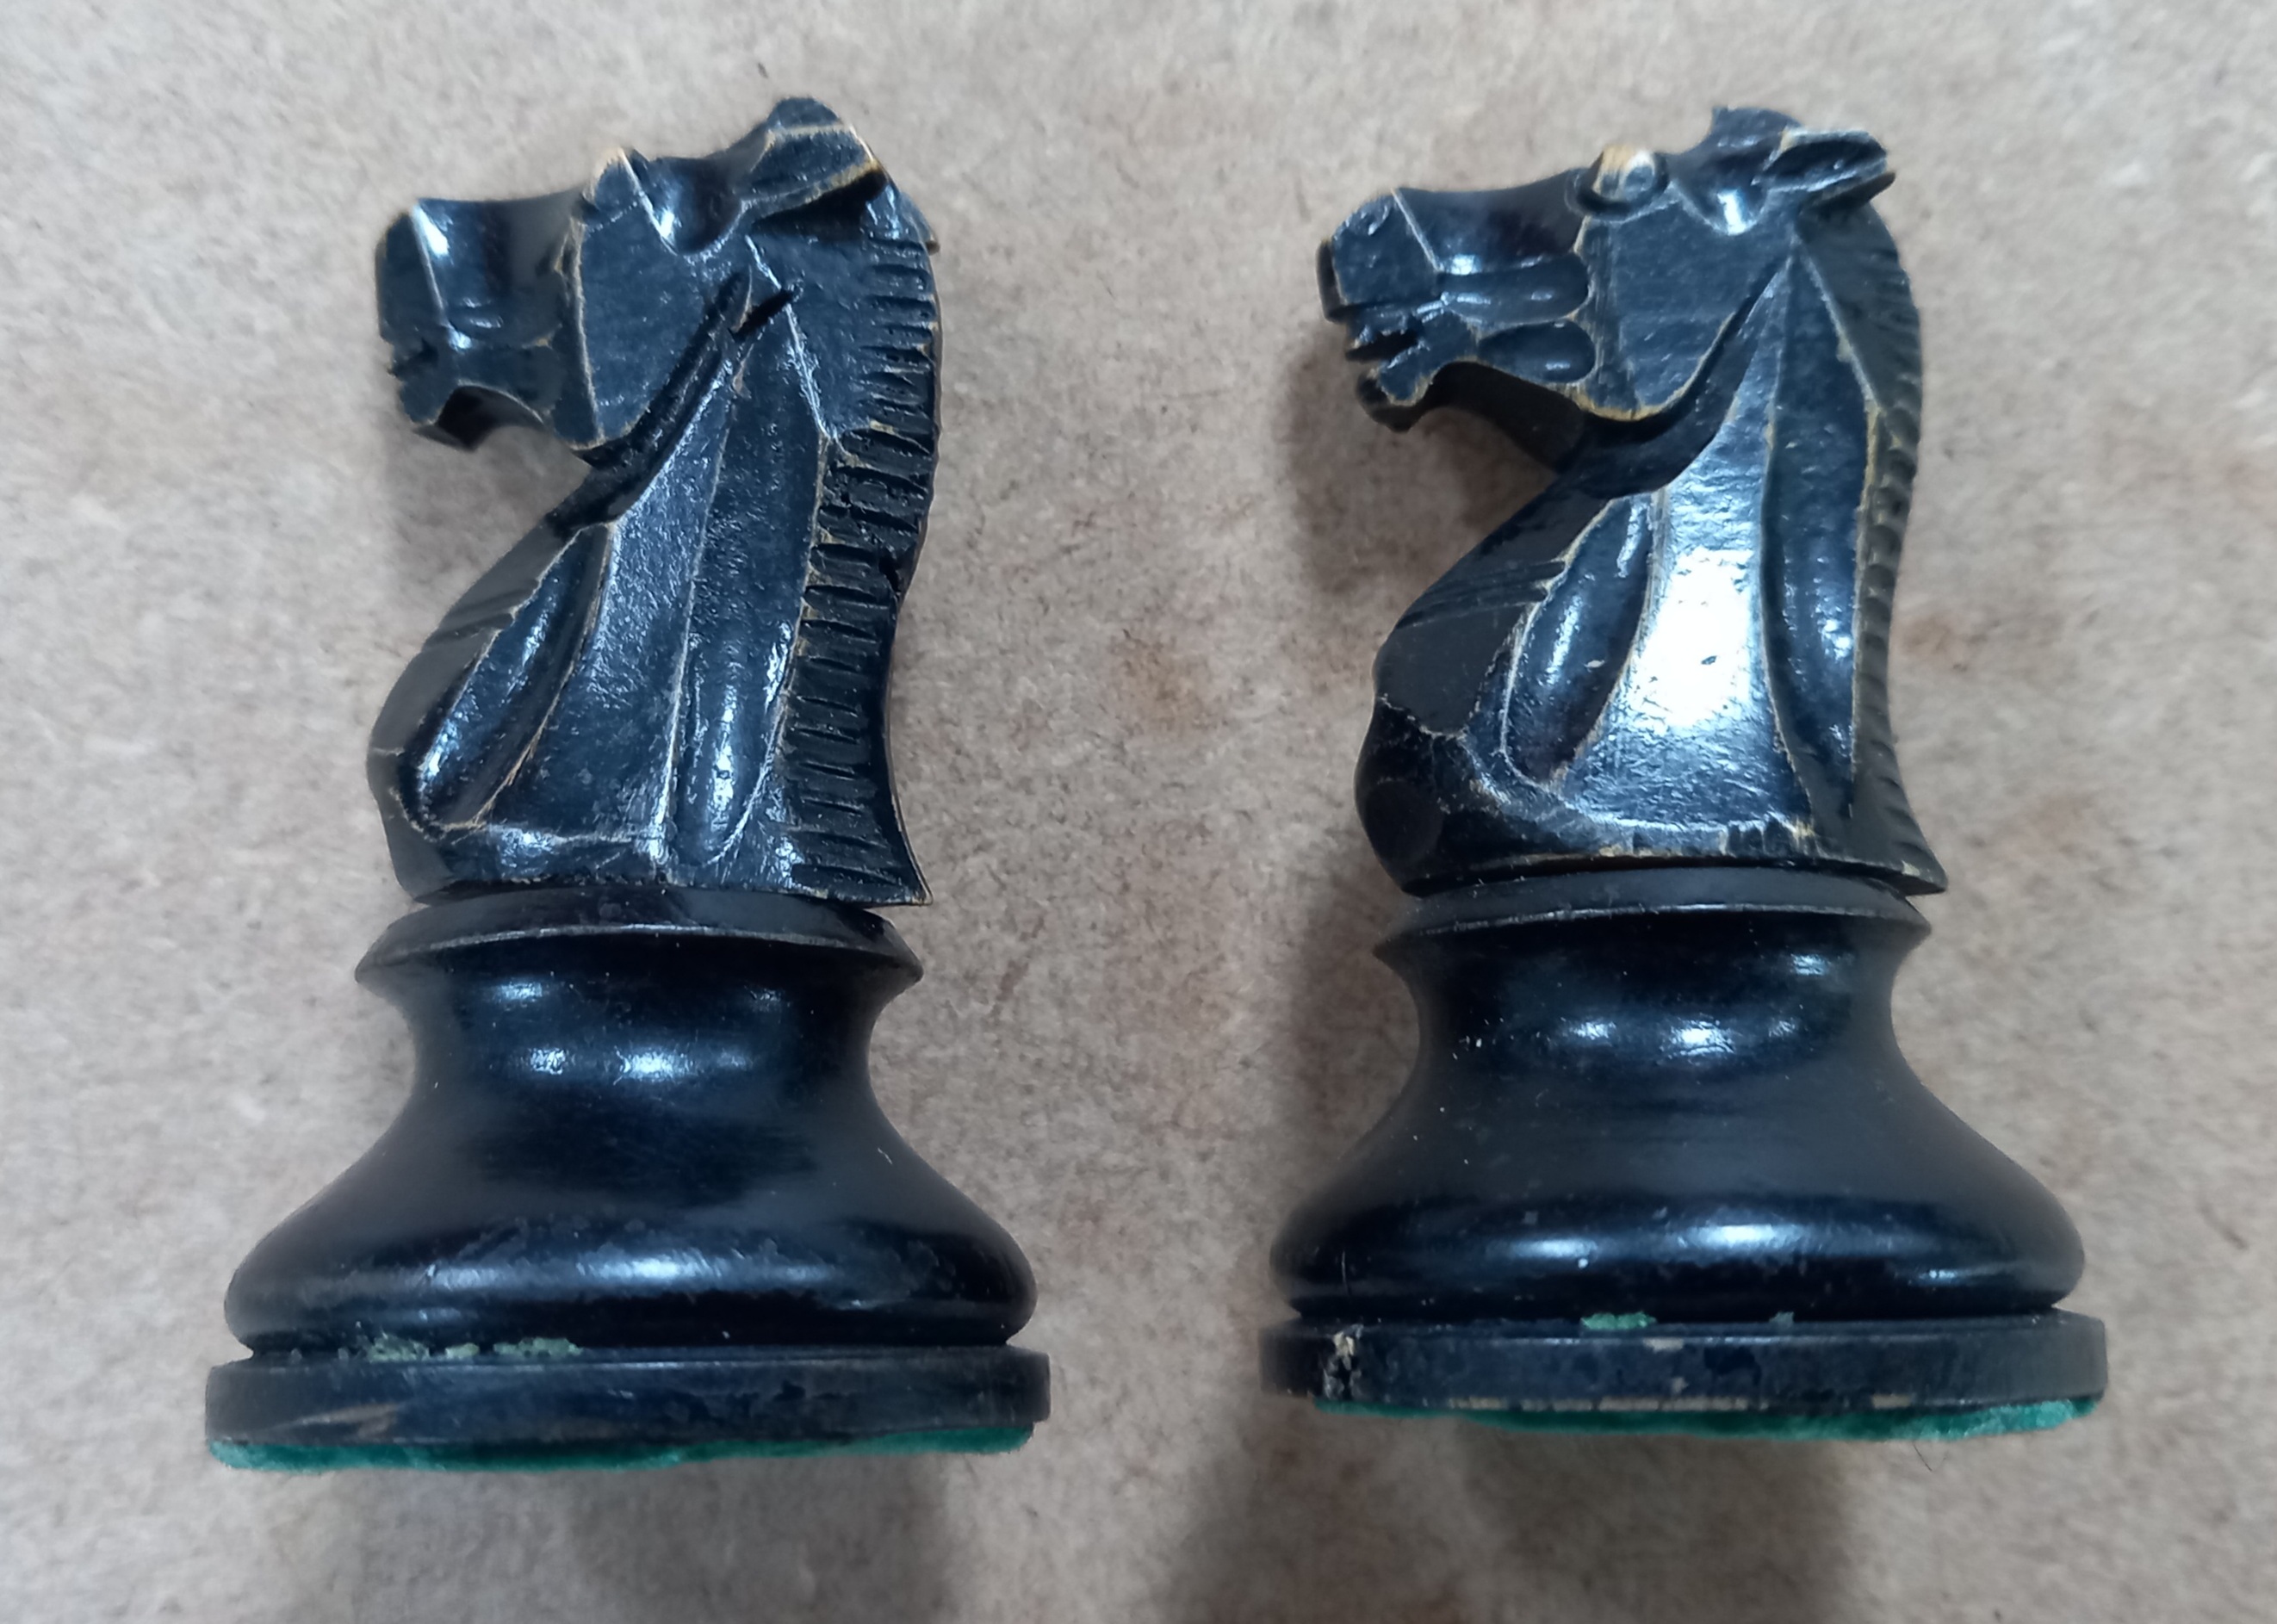 A German Schachklub chess set, early 20th century, of typical form with boxwood and ebony pieces, in - Image 8 of 8